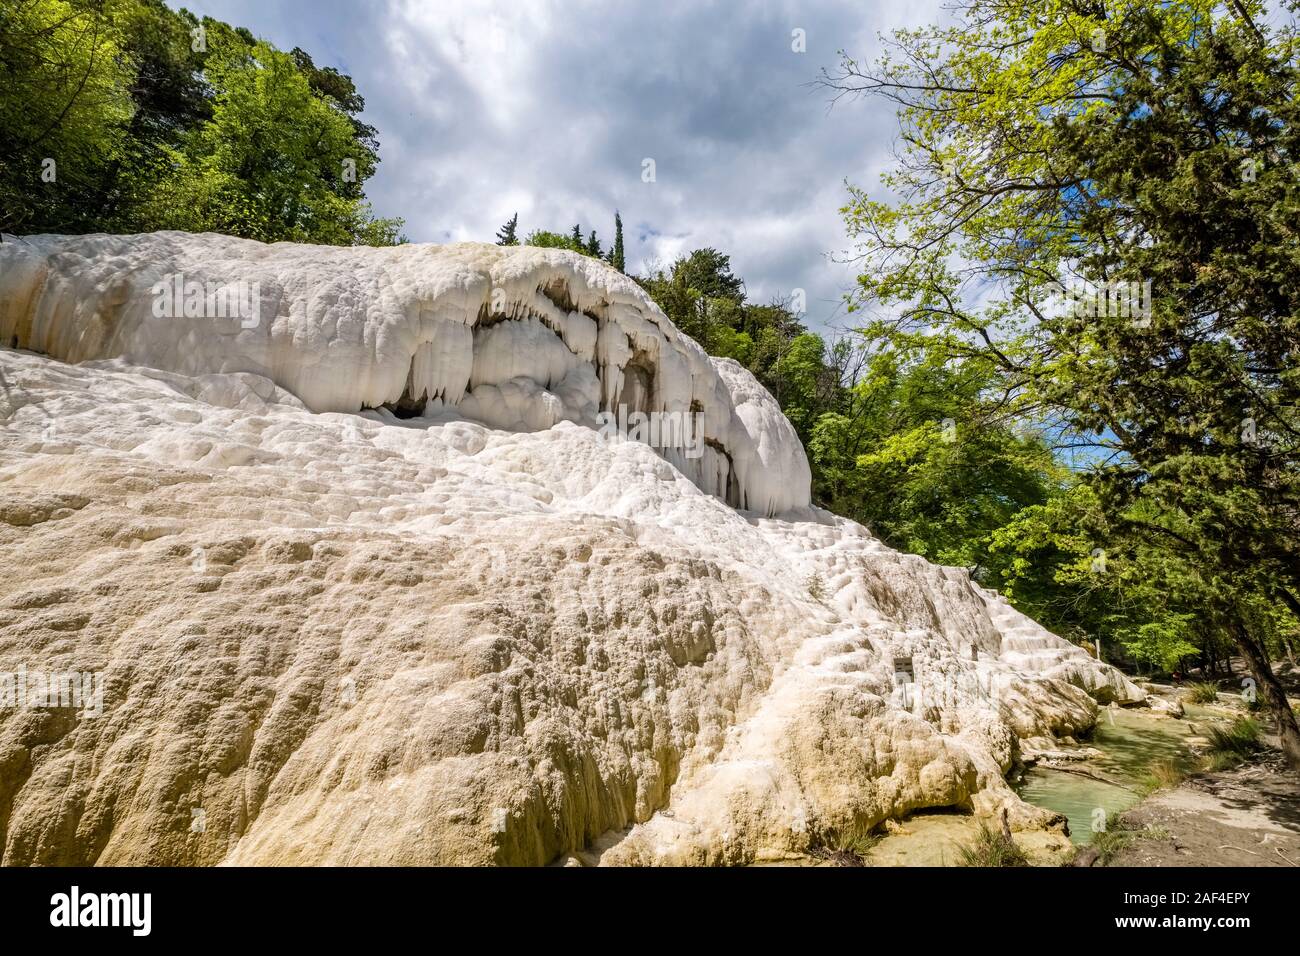 The Balena, a white travertine stone in the Fosso Bianco valley, the thermal springs of Bagni San Filippo Stock Photo